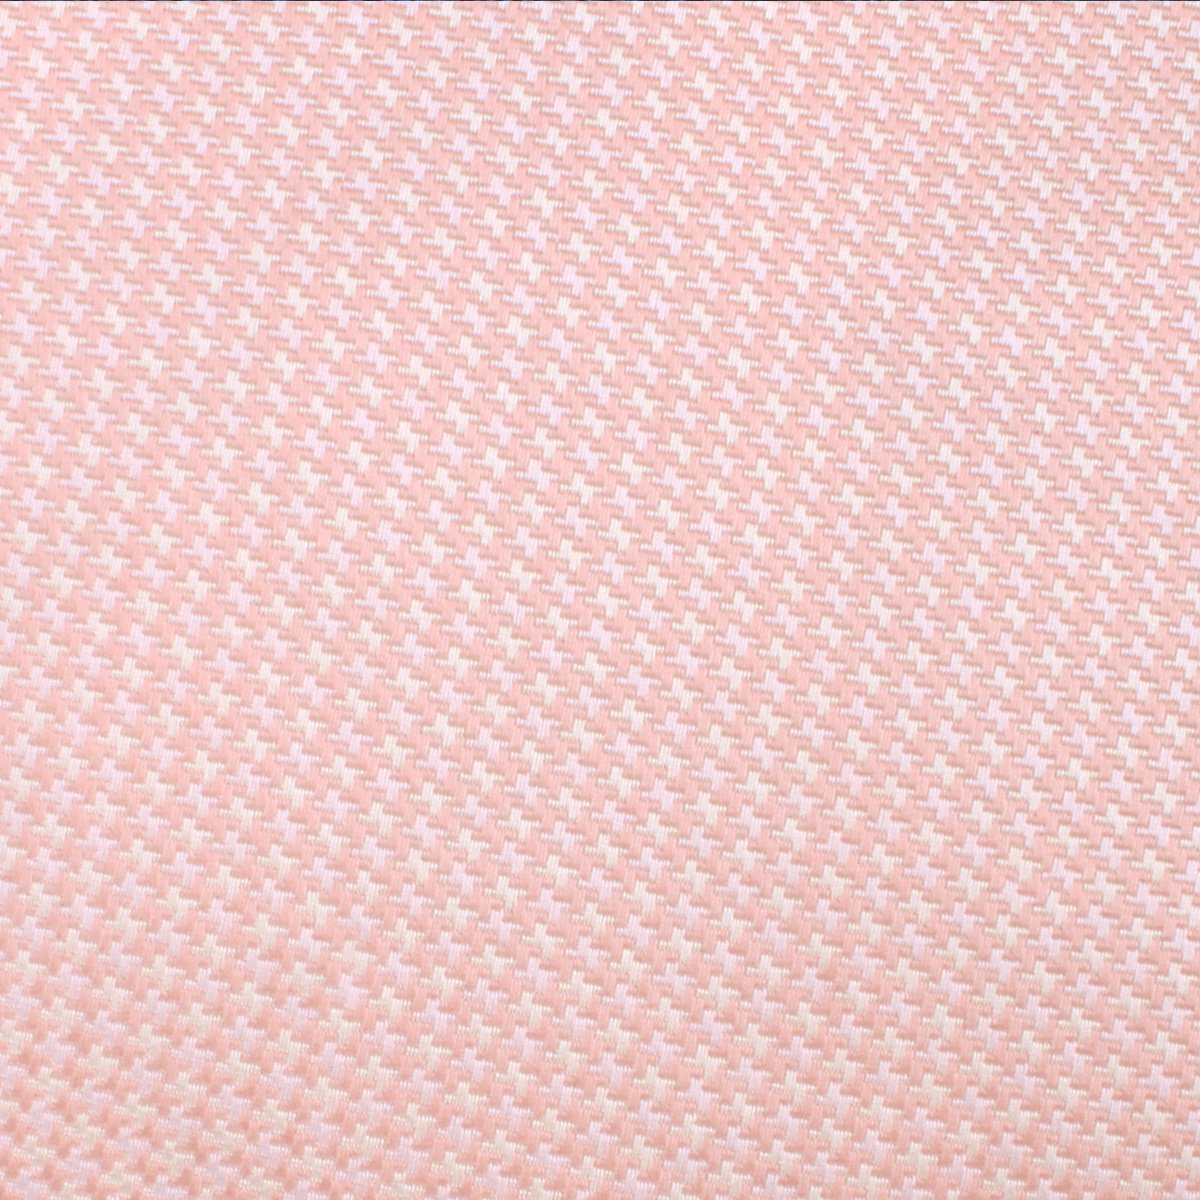 Blush Pink Houndstooth Fabric Swatch